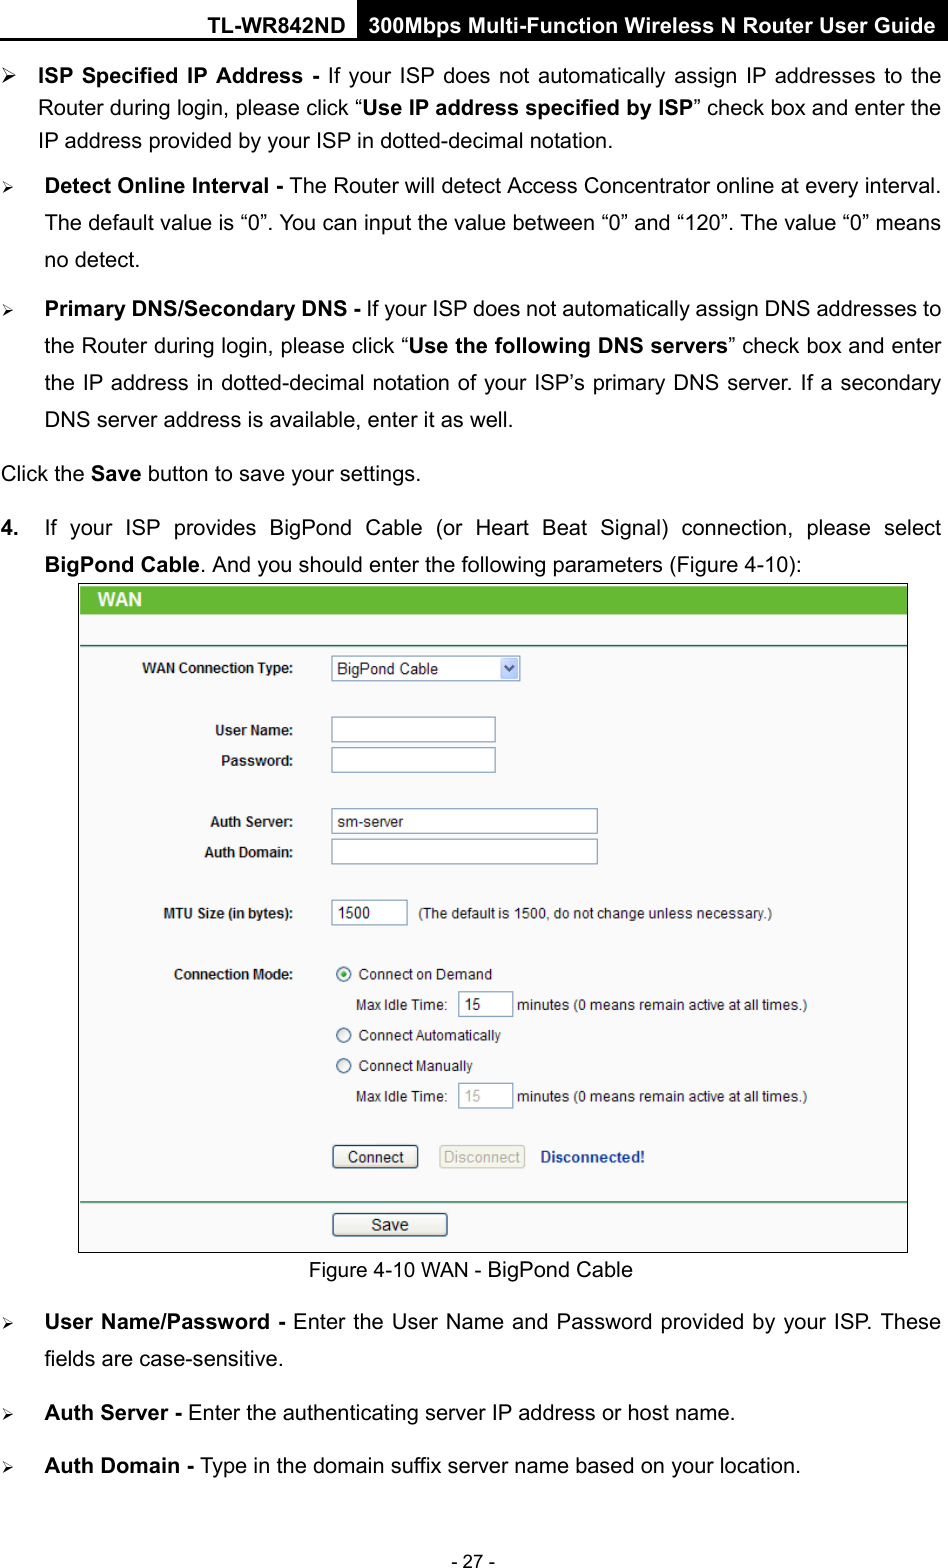 TL-WR842ND 300Mbps Multi-Function Wireless N Router User Guide  - 27 -  ISP Specified IP Address -  If your ISP does not automatically assign IP addresses to the Router during login, please click “Use IP address specified by ISP” check box and enter the IP address provided by your ISP in dotted-decimal notation.  Detect Online Interval - The Router will detect Access Concentrator online at every interval. The default value is “0”. You can input the value between “0” and “120”. The value “0” means no detect.  Primary DNS/Secondary DNS - If your ISP does not automatically assign DNS addresses to the Router during login, please click “Use the following DNS servers” check box and enter the IP address in dotted-decimal notation of your ISP’s primary DNS server. If a secondary DNS server address is available, enter it as well. Click the Save button to save your settings. 4. If your ISP provides BigPond Cable (or Heart Beat Signal) connection, please select BigPond Cable. And you should enter the following parameters (Figure 4-10):  Figure 4-10 WAN - BigPond Cable  User Name/Password - Enter the User Name and Password provided by your ISP. These fields are case-sensitive.  Auth Server - Enter the authenticating server IP address or host name.  Auth Domain - Type in the domain suffix server name based on your location. 